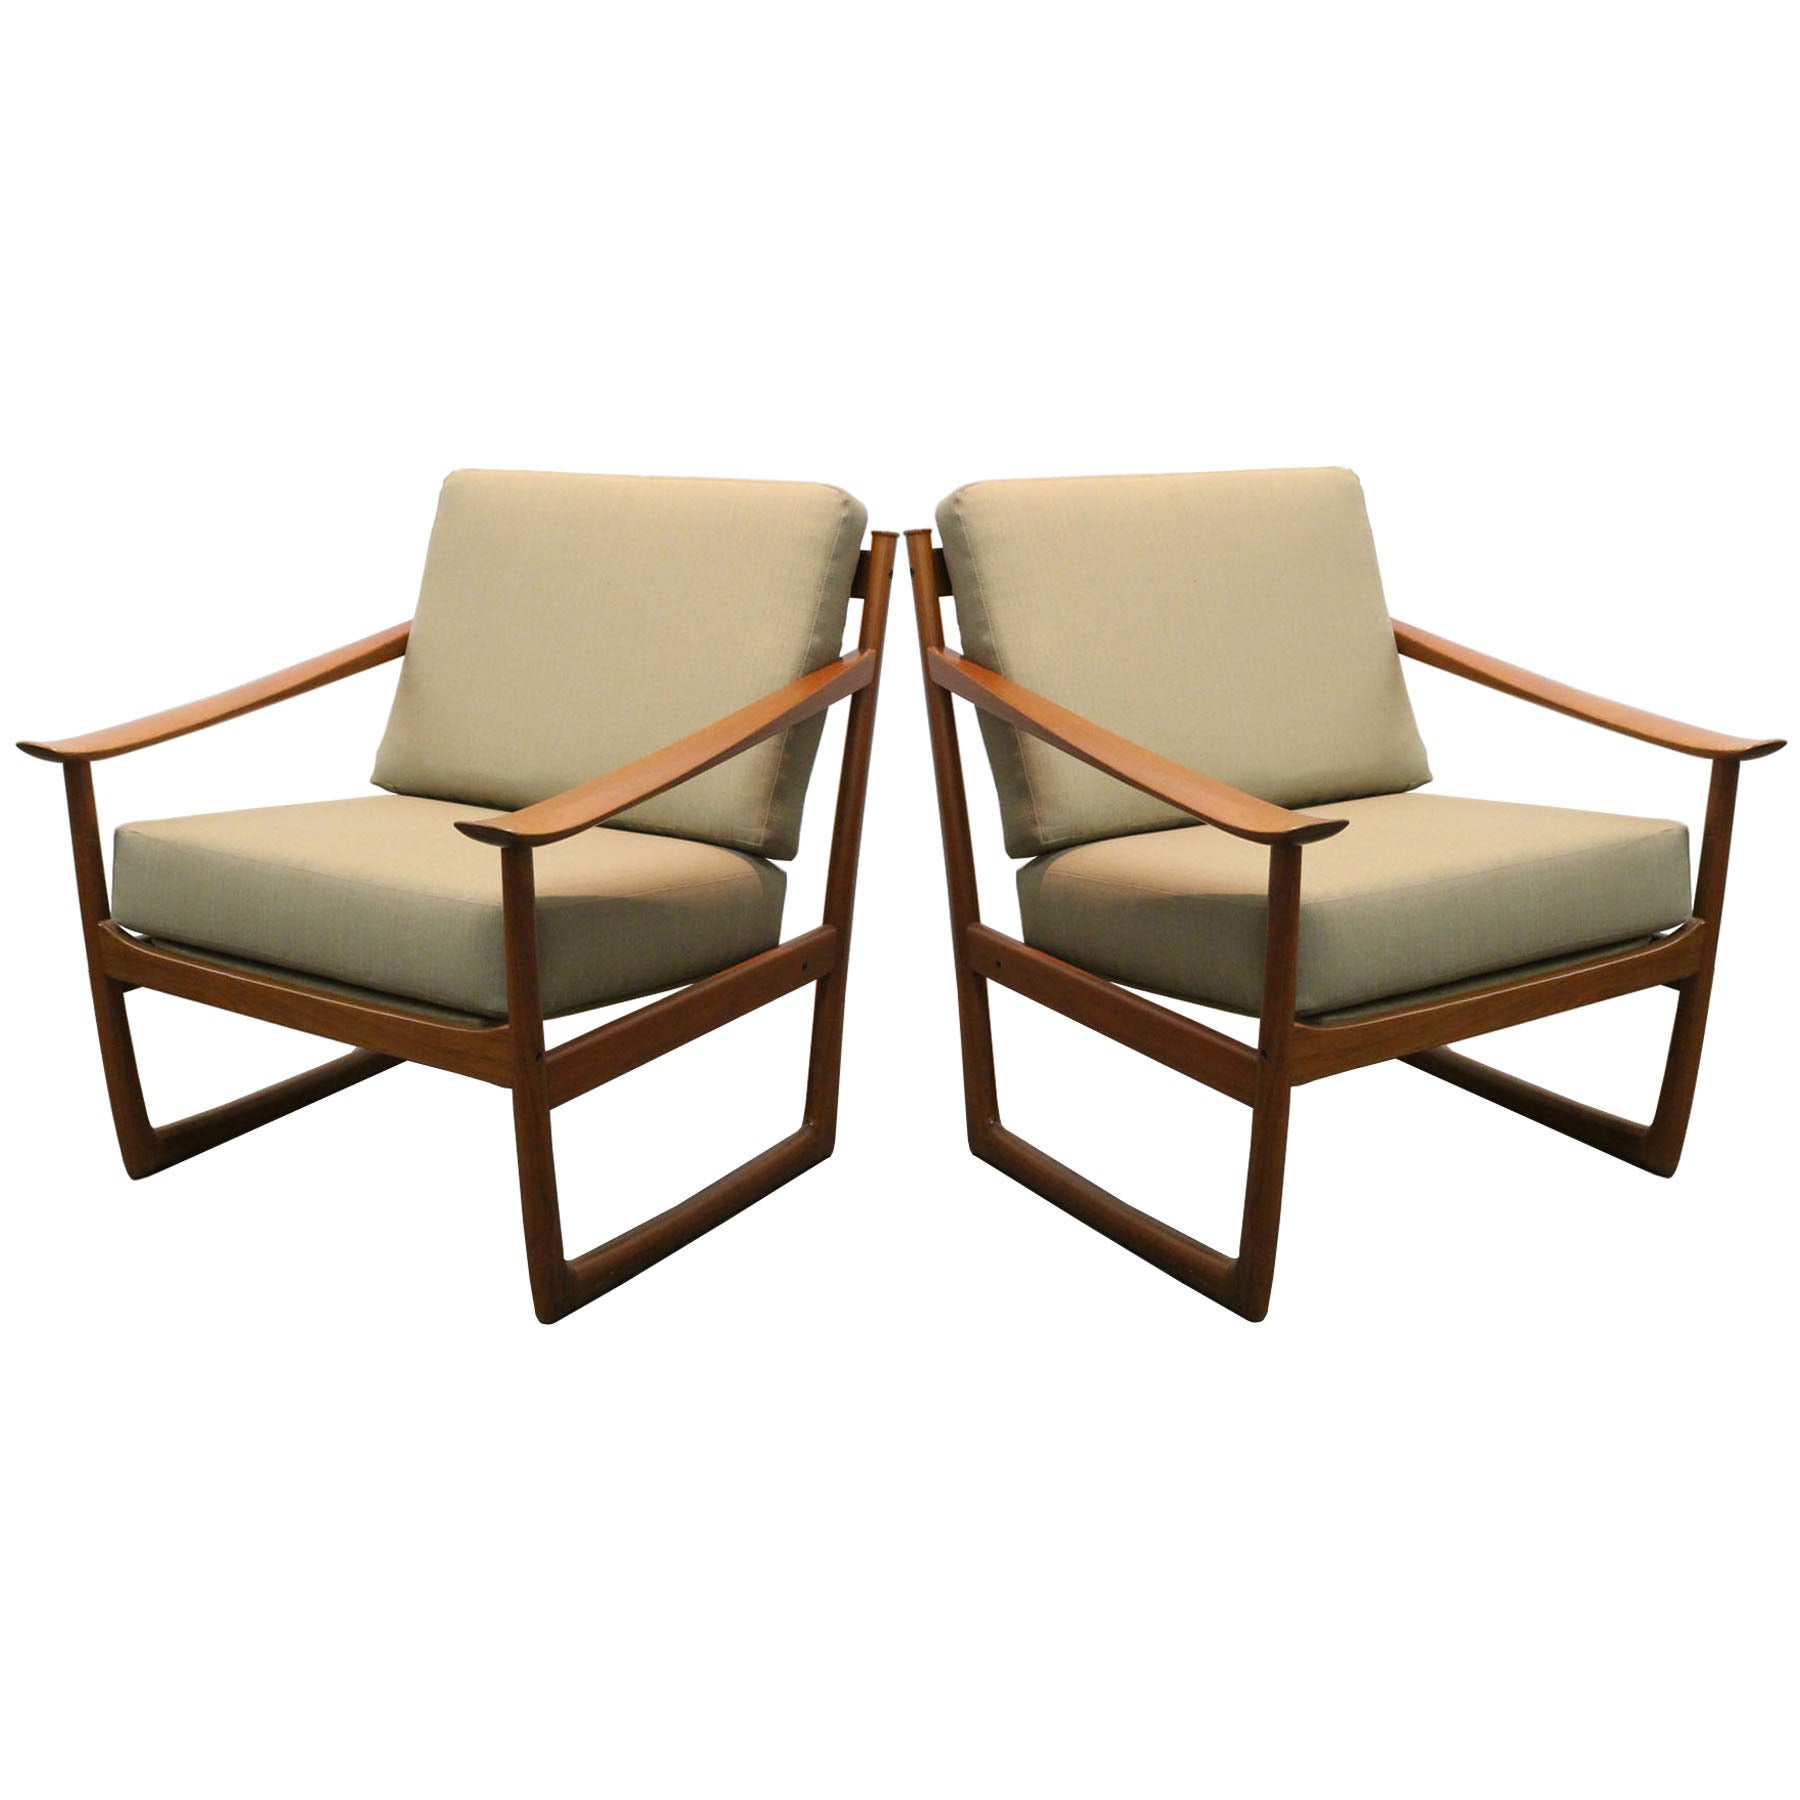 Pair 1960s Danish "Sleigh" Chairs by Peter Hvidt